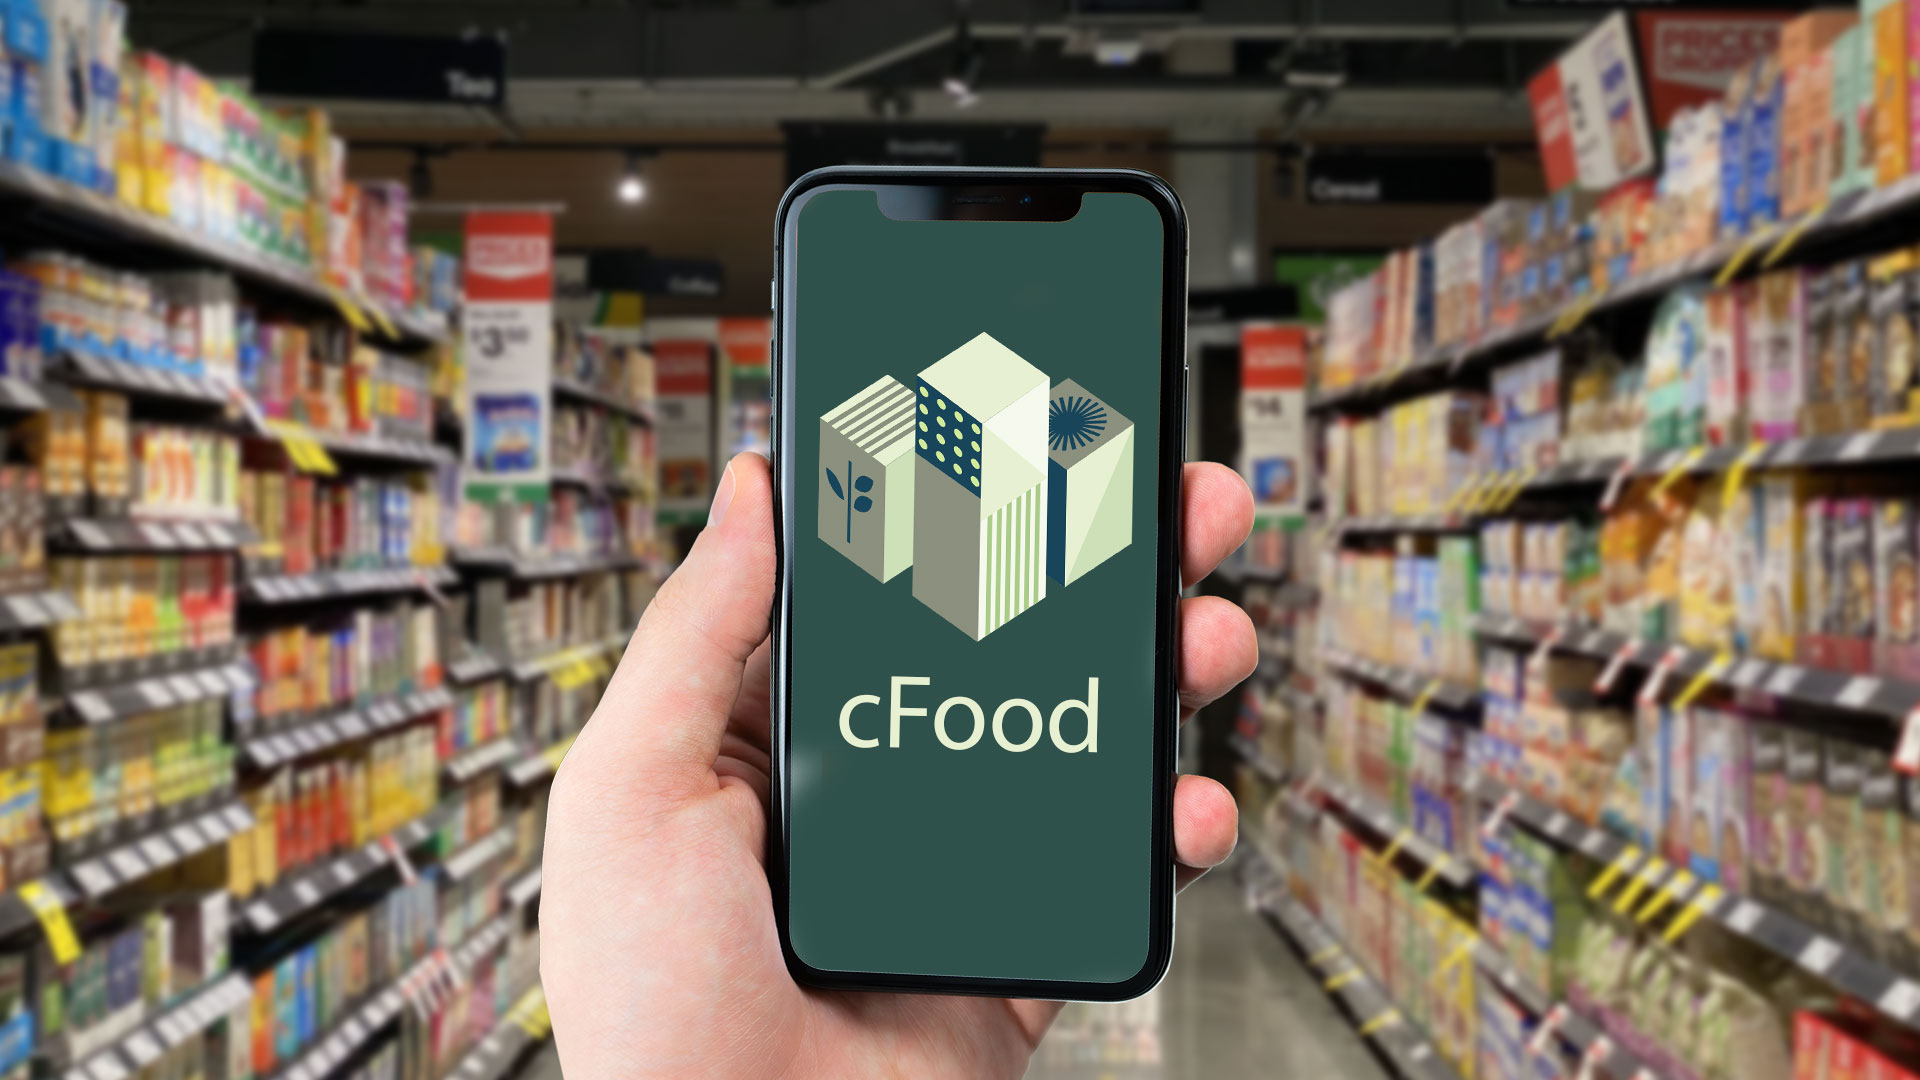 inside a store with cFood app, front-page